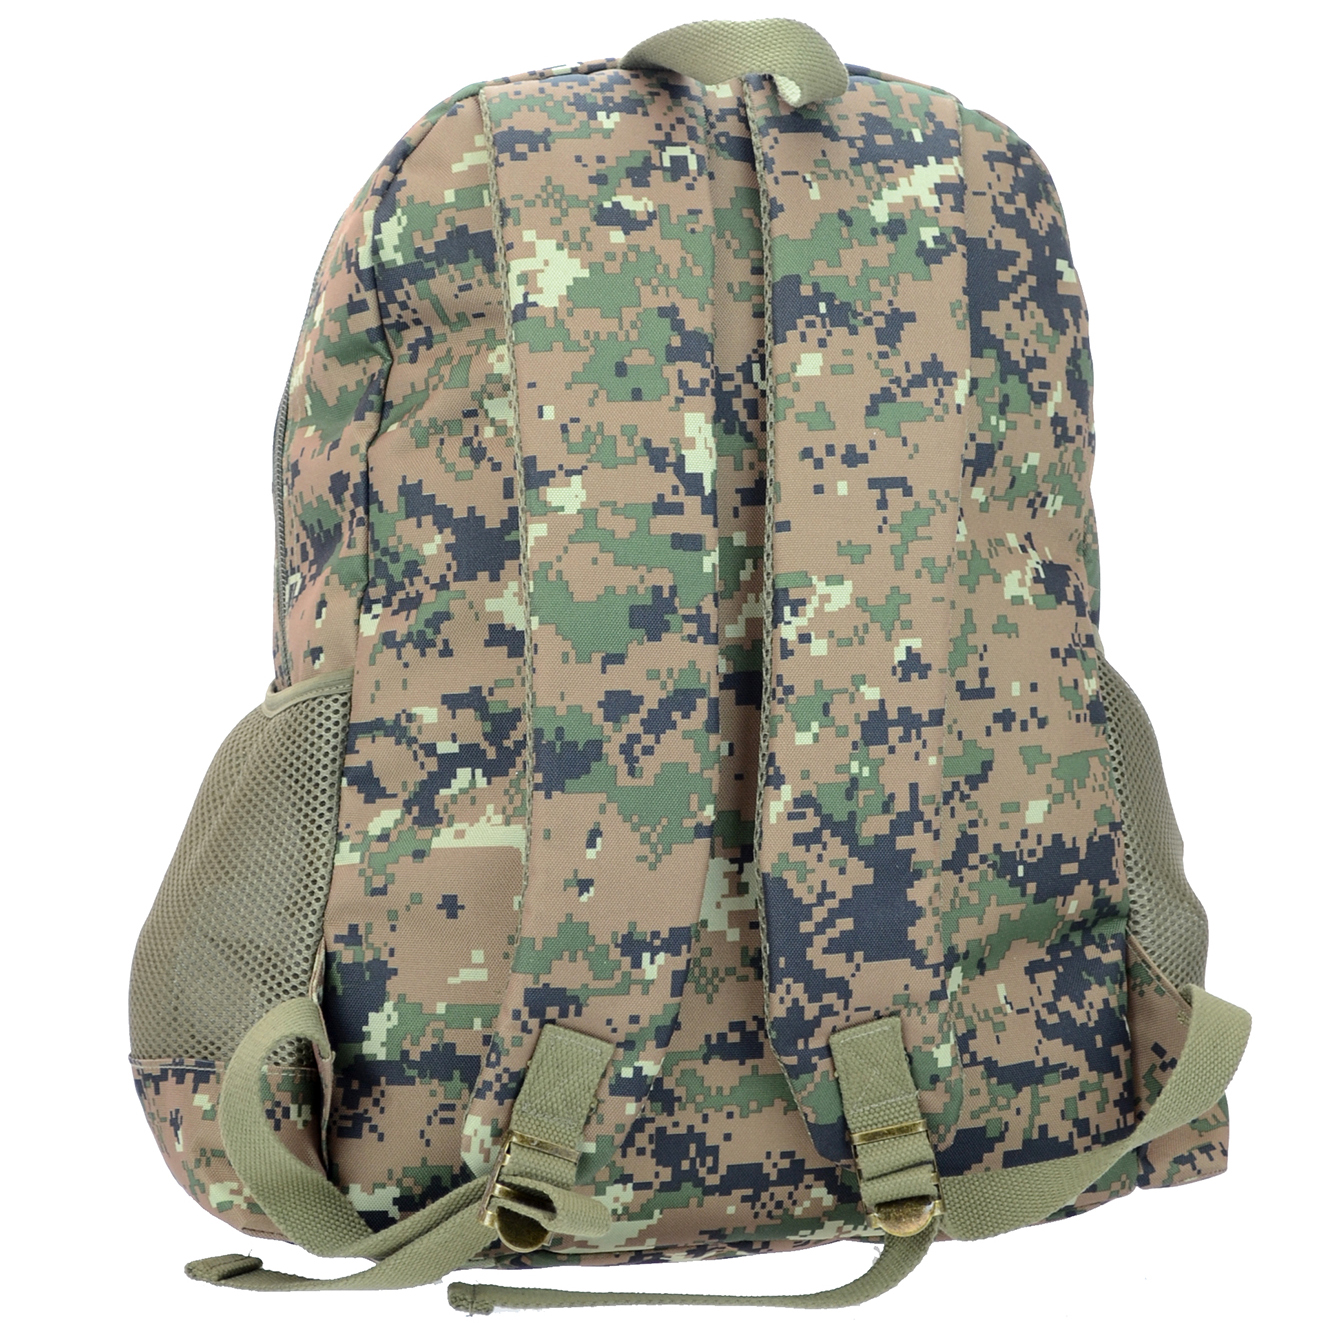 Montauk Leather Club Military Camouflage Woodland Print Water Resistant Backpack with 1Front Zipper Pocket and 1 Velcro Flap Zipper Pocket - image 4 of 4